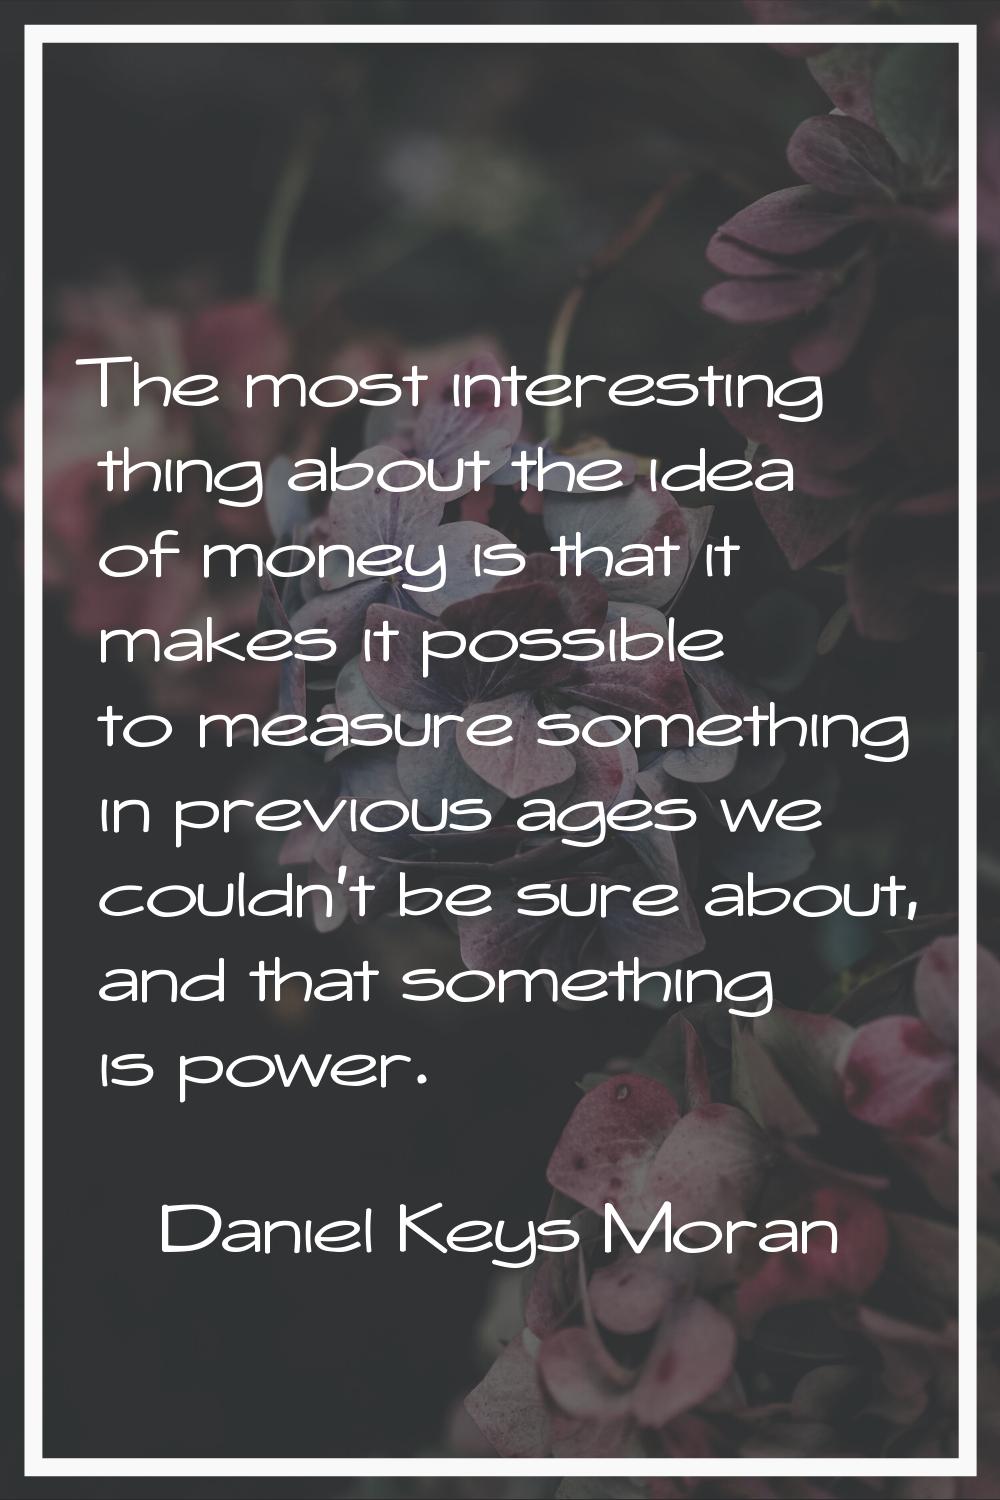 The most interesting thing about the idea of money is that it makes it possible to measure somethin